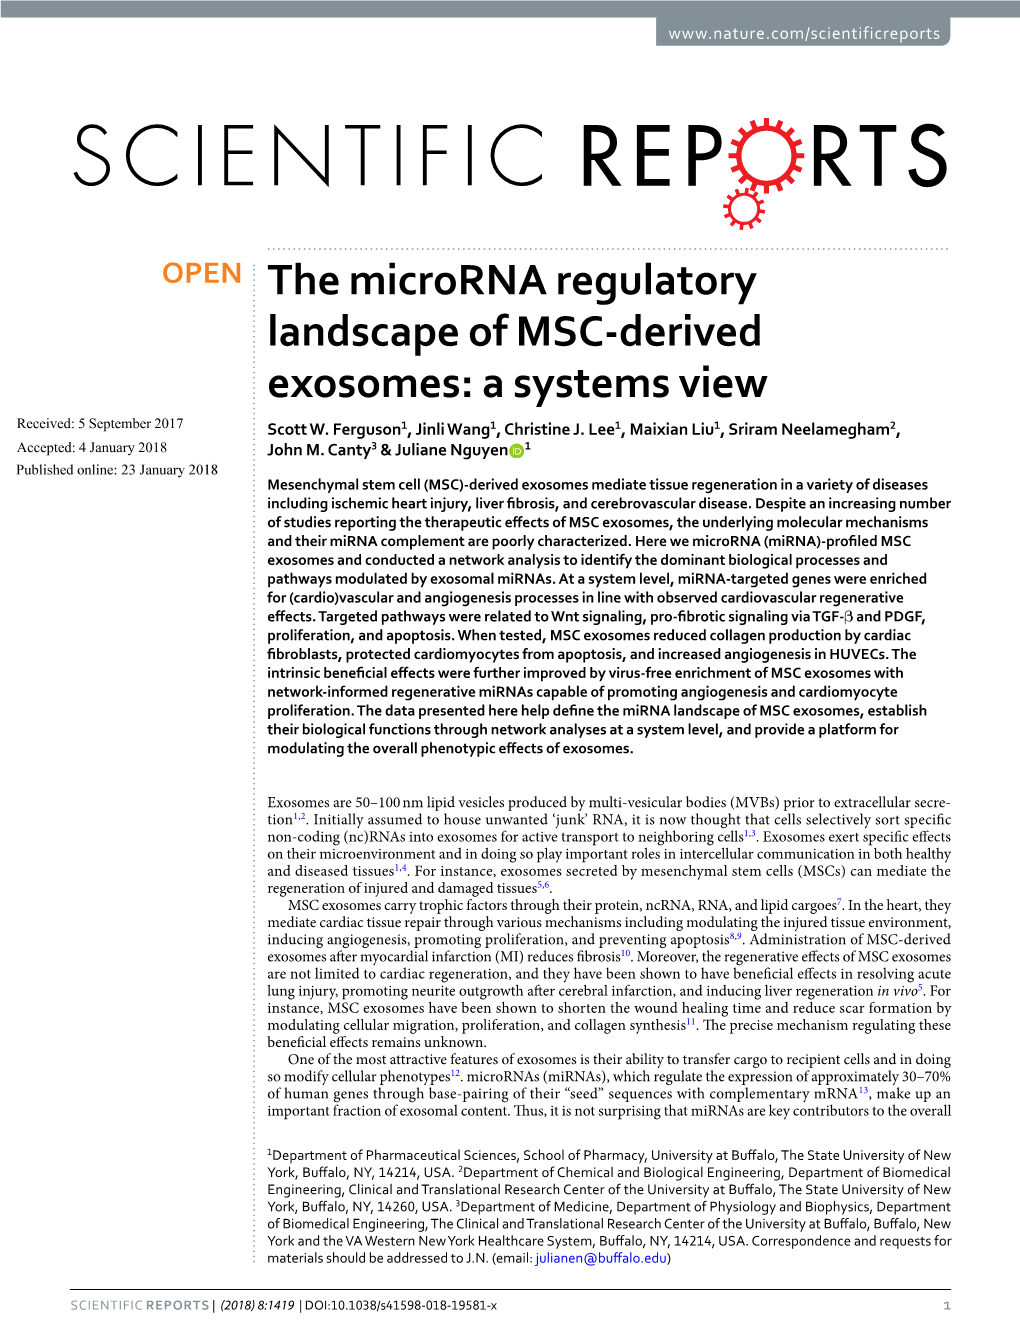 The Microrna Regulatory Landscape of MSC-Derived Exosomes: a Systems View Received: 5 September 2017 Scott W